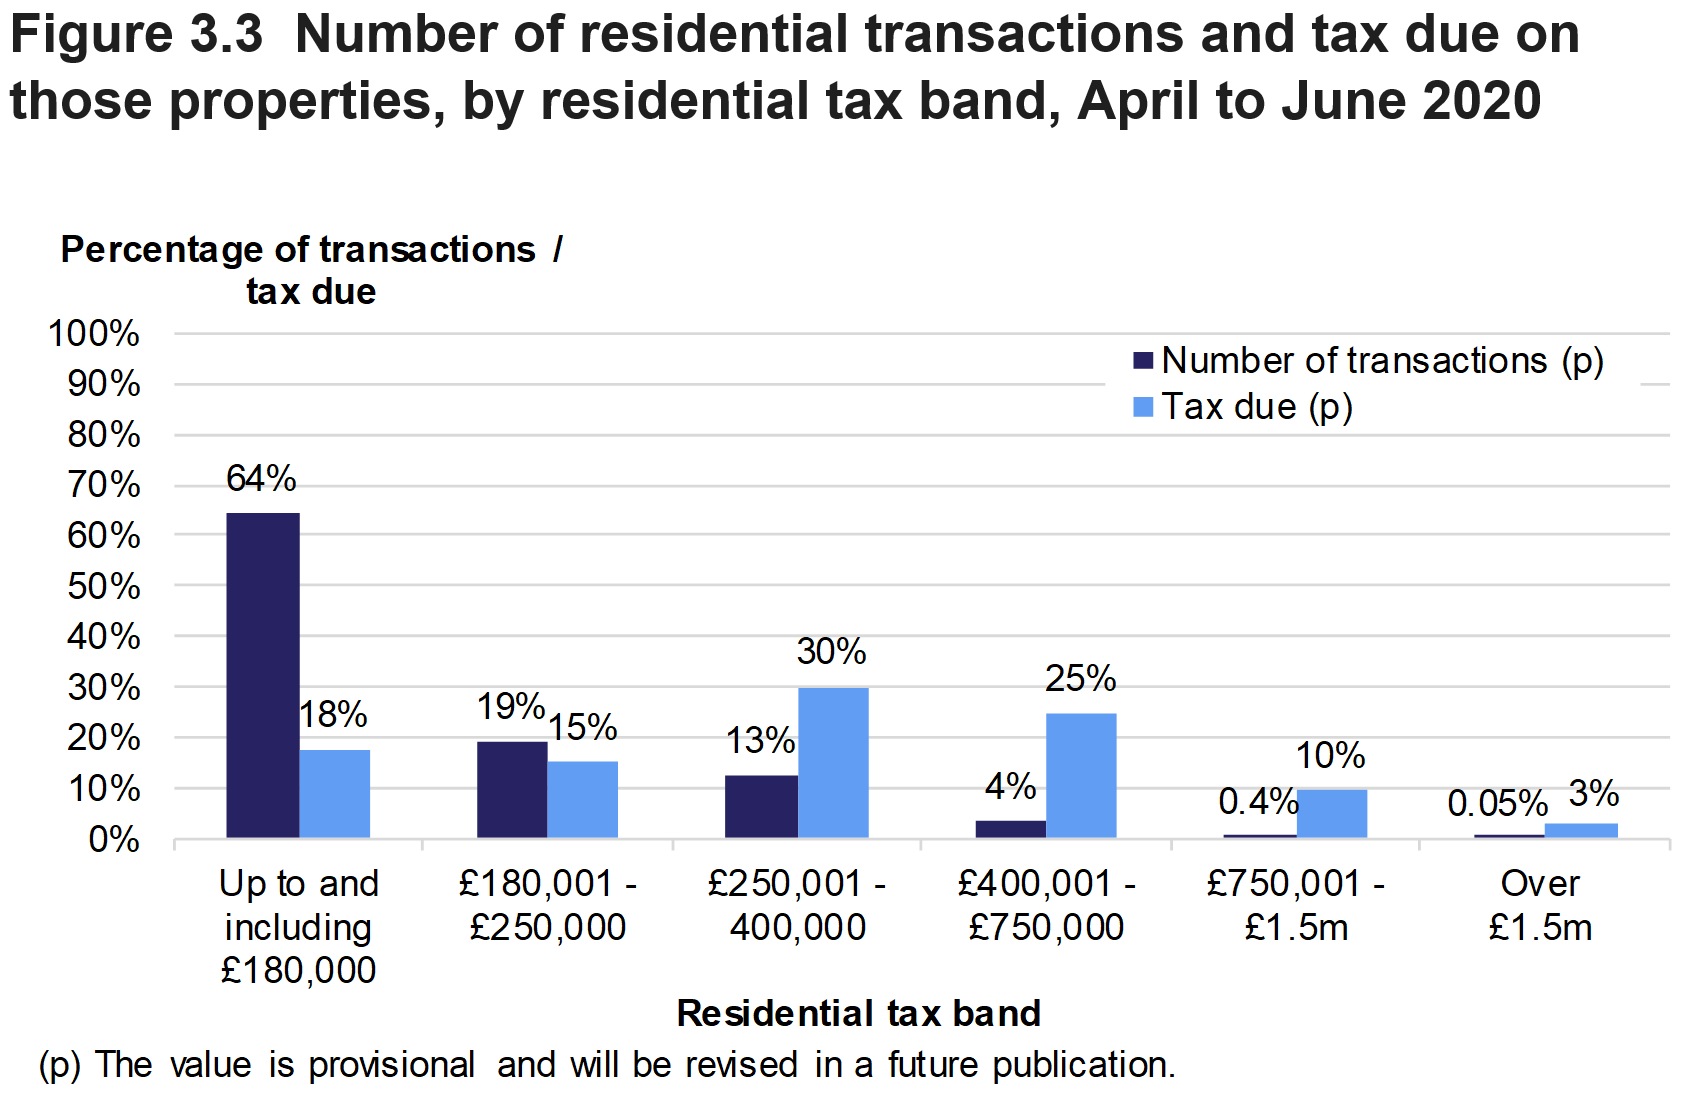 Figure 3.3 shows the number of residential transactions and amount of tax due, by residential tax band. Data is presented as the percentage of transactions or tax due and relates to transactions effective in April to June 2020.